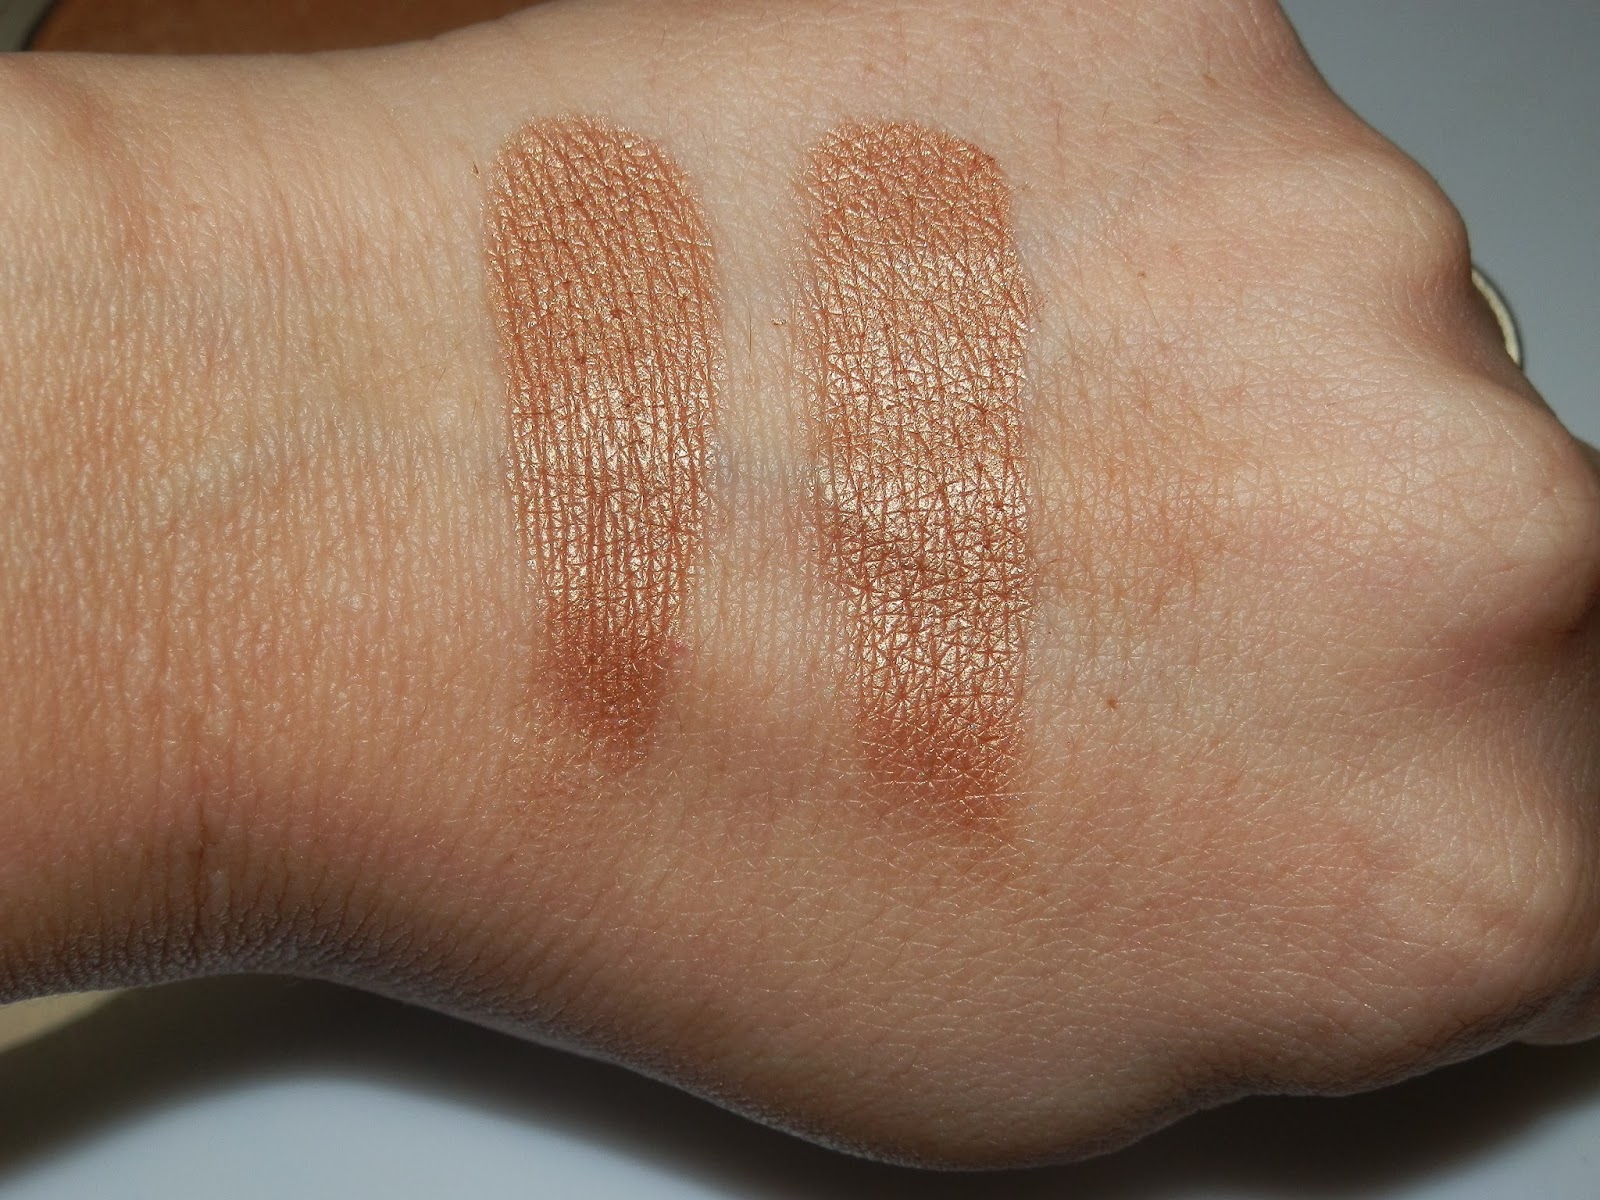 The Balm Betty Lou Manizer Swatches 